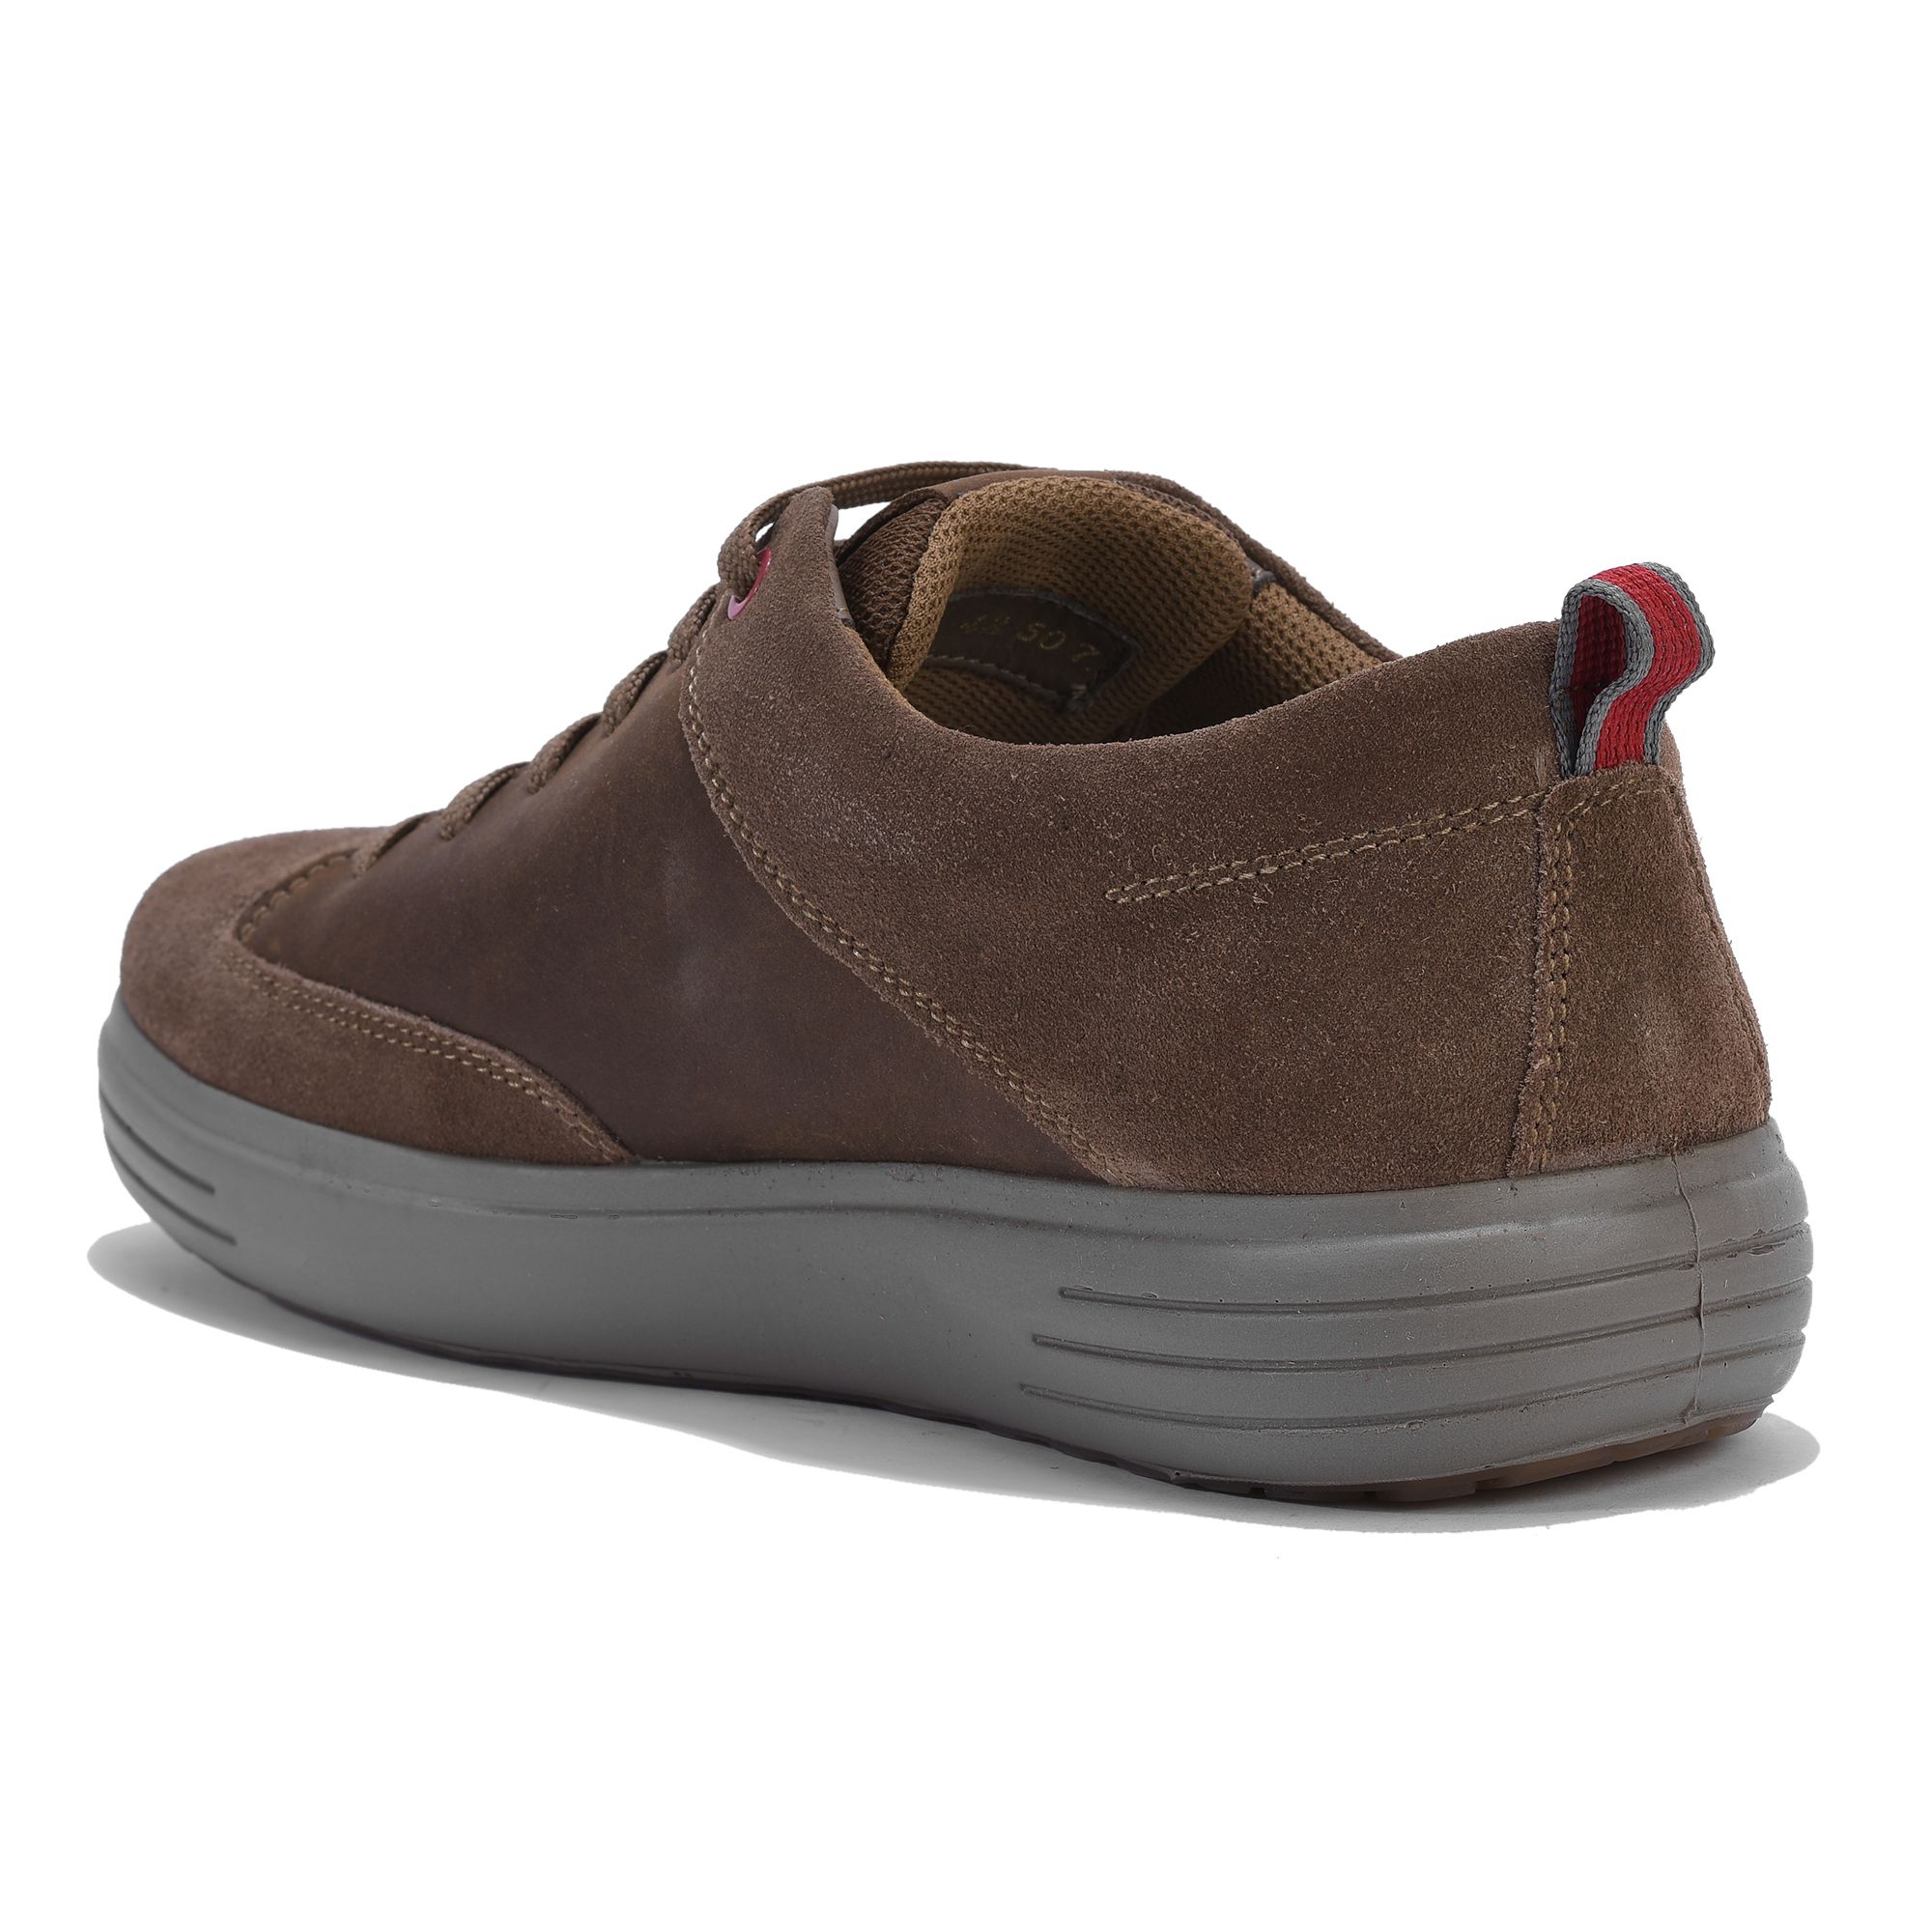 Tobacco casual shoes